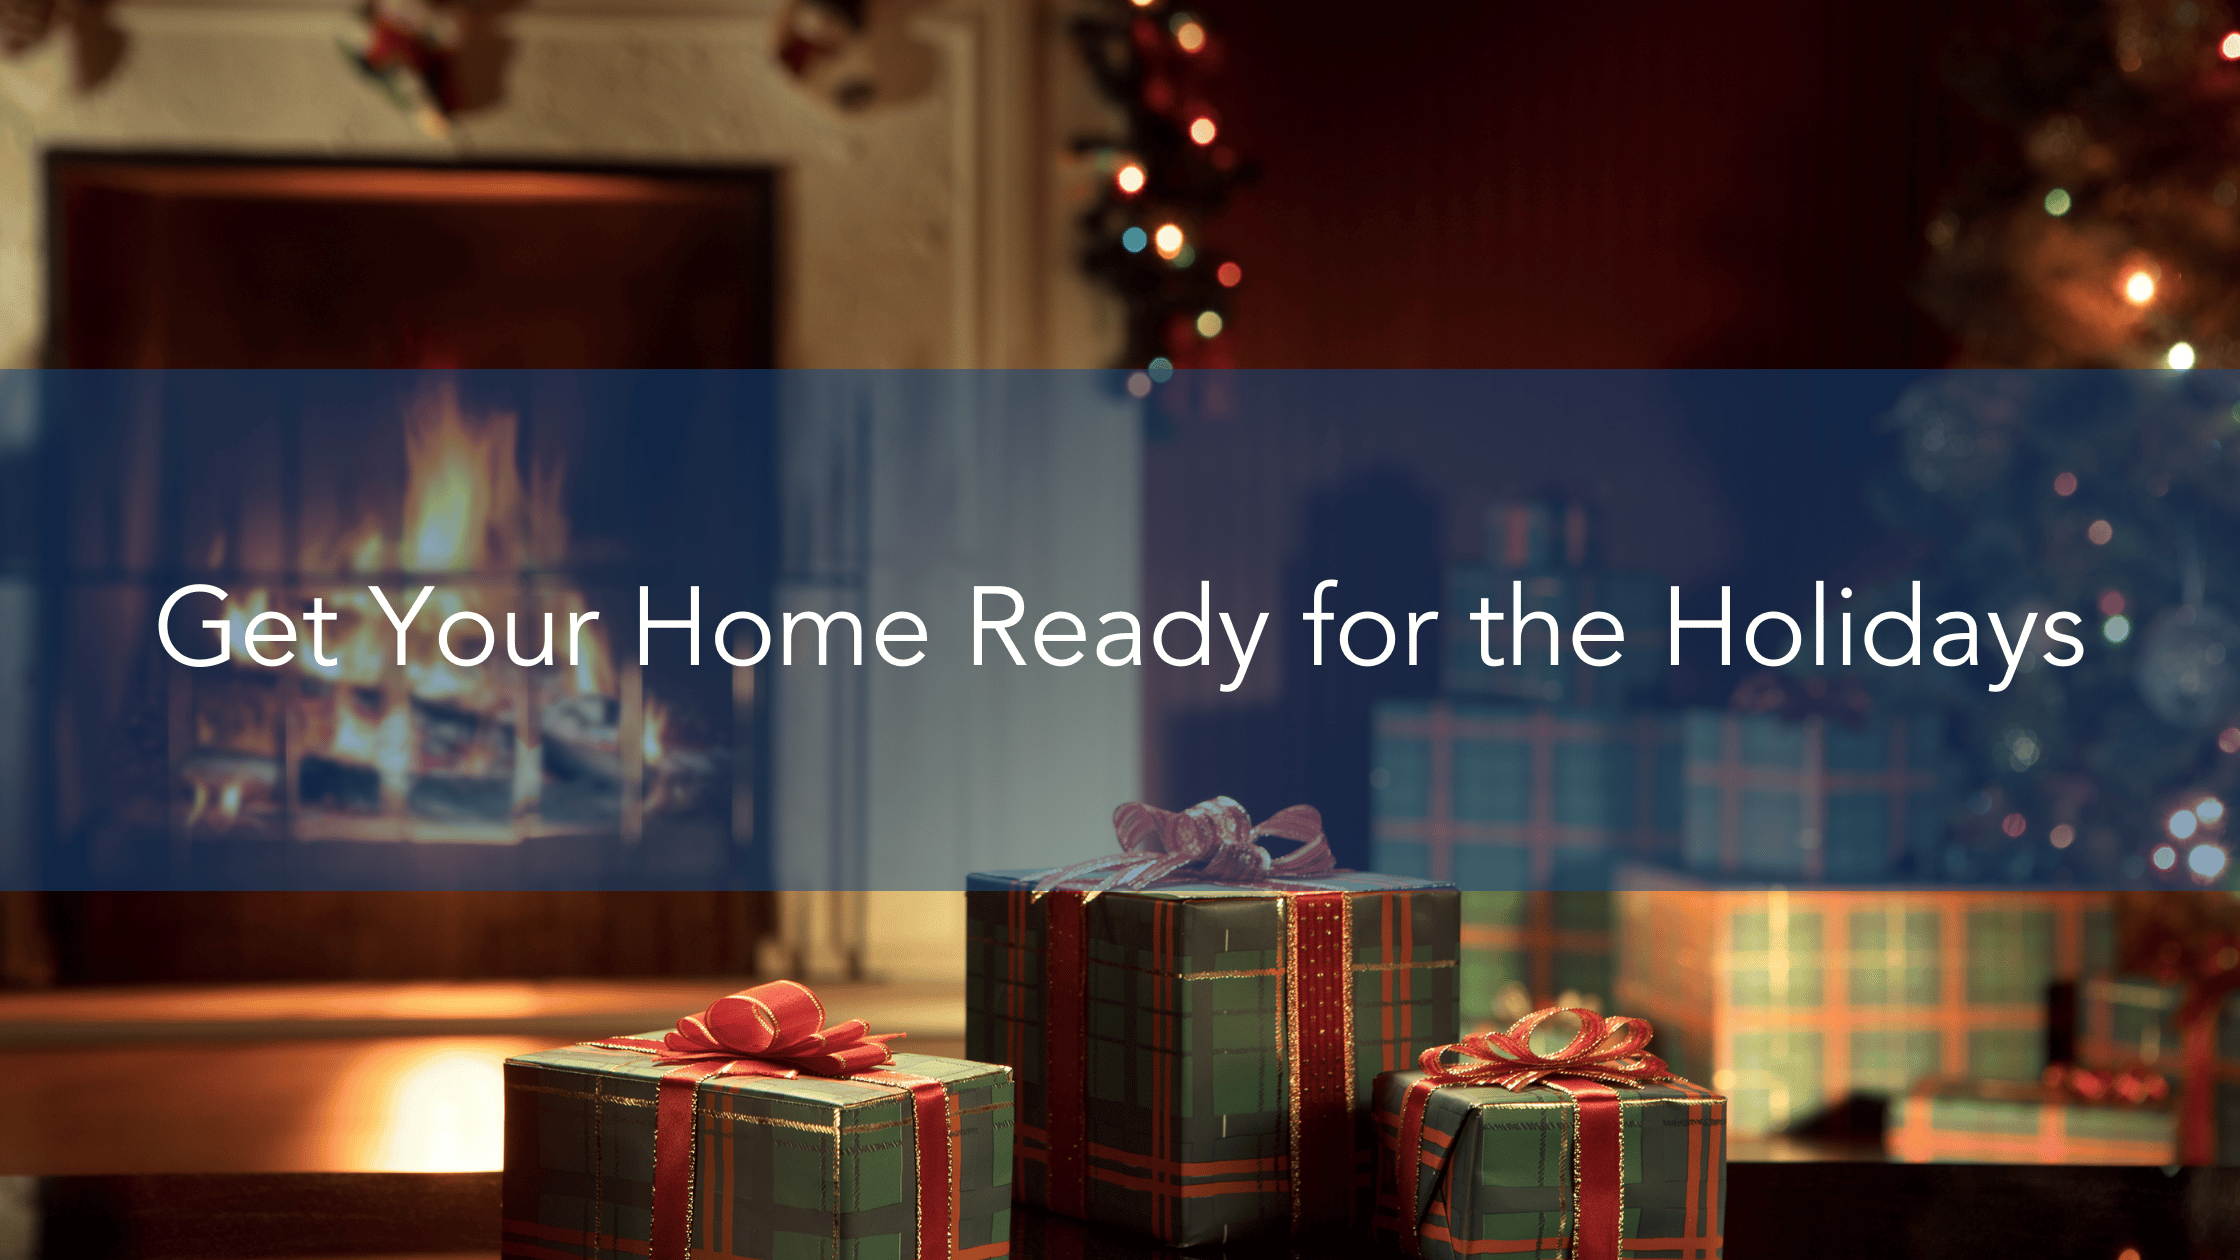 https://handymanconnection.com/wp-content/uploads/2022/12/Get-Your-Home-Ready-for-the-Holidays-text.png